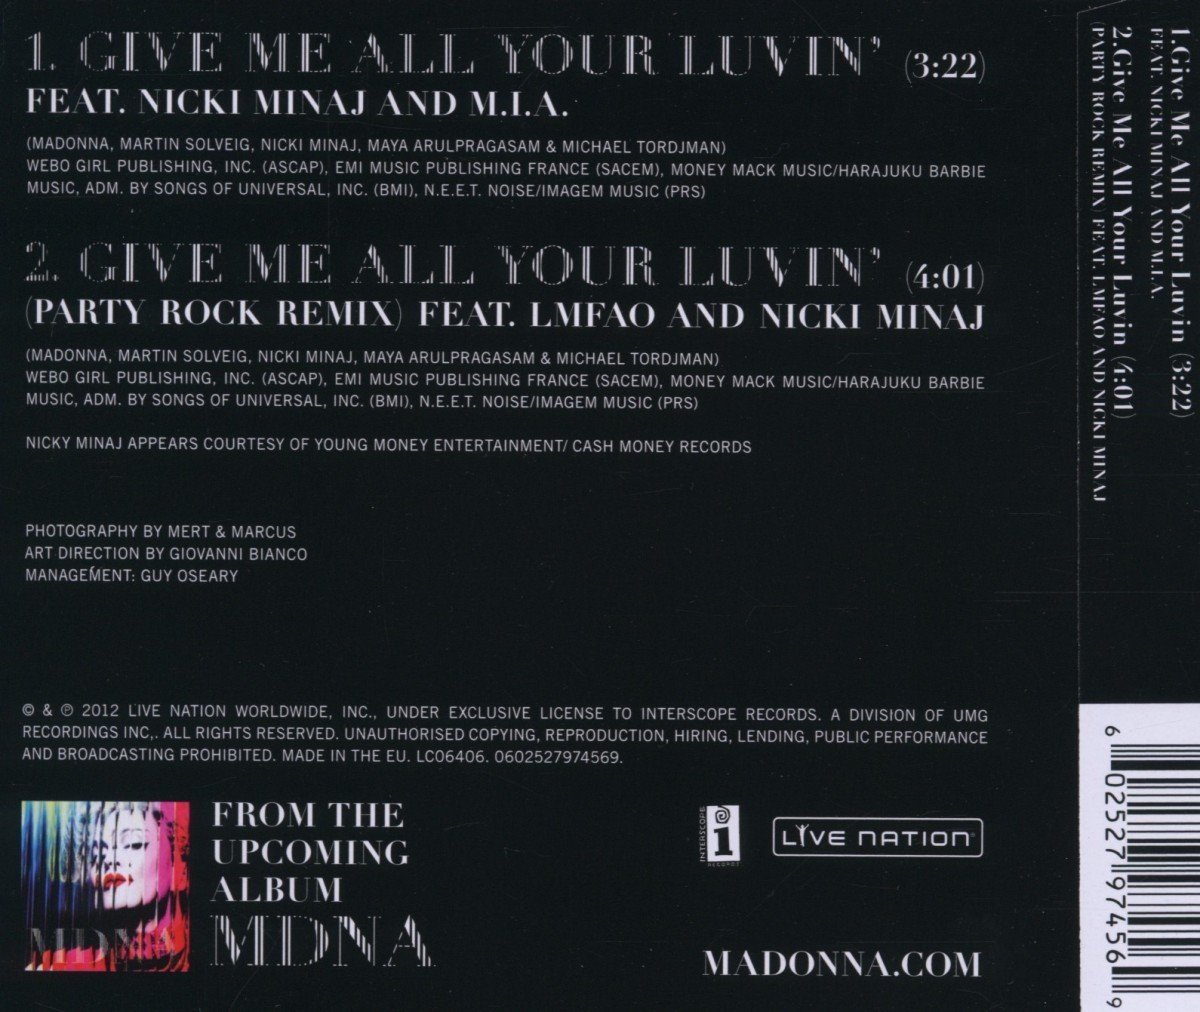 20120226-pictures-madonna-give-me-all-your-luvin-back.jpg